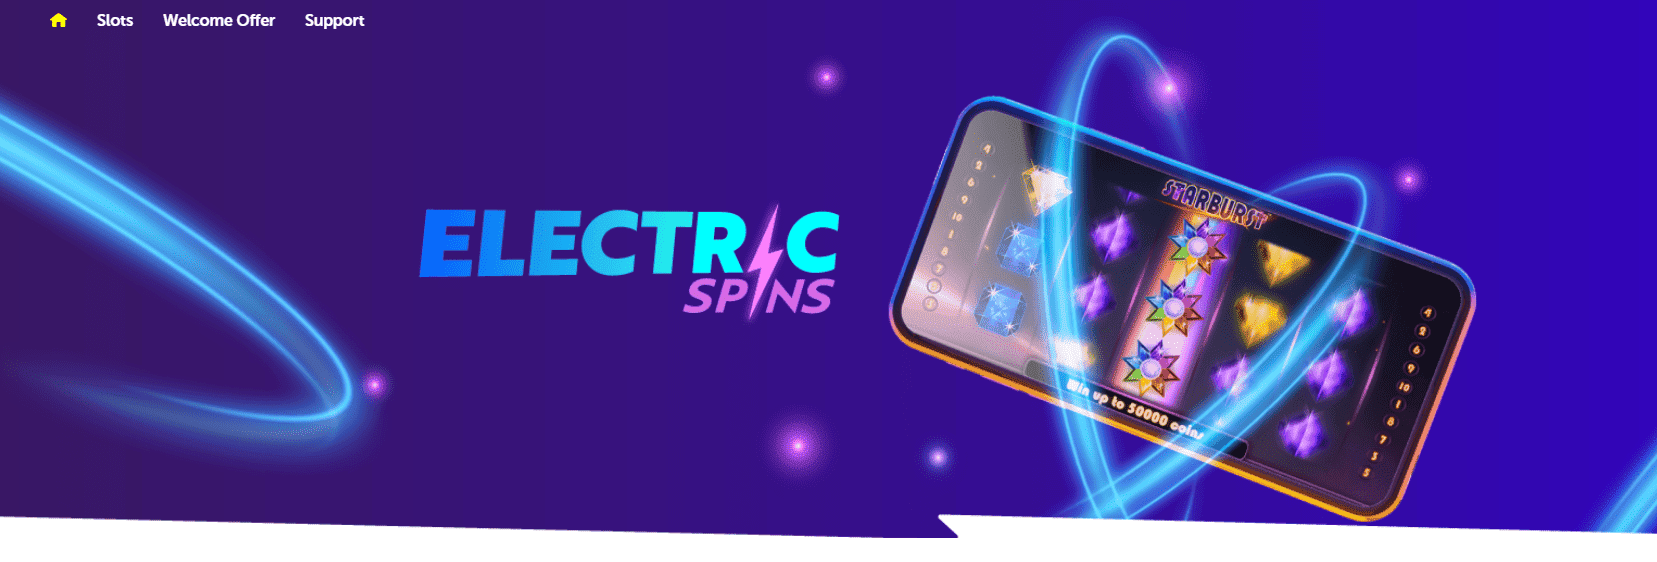 electric-spins-1